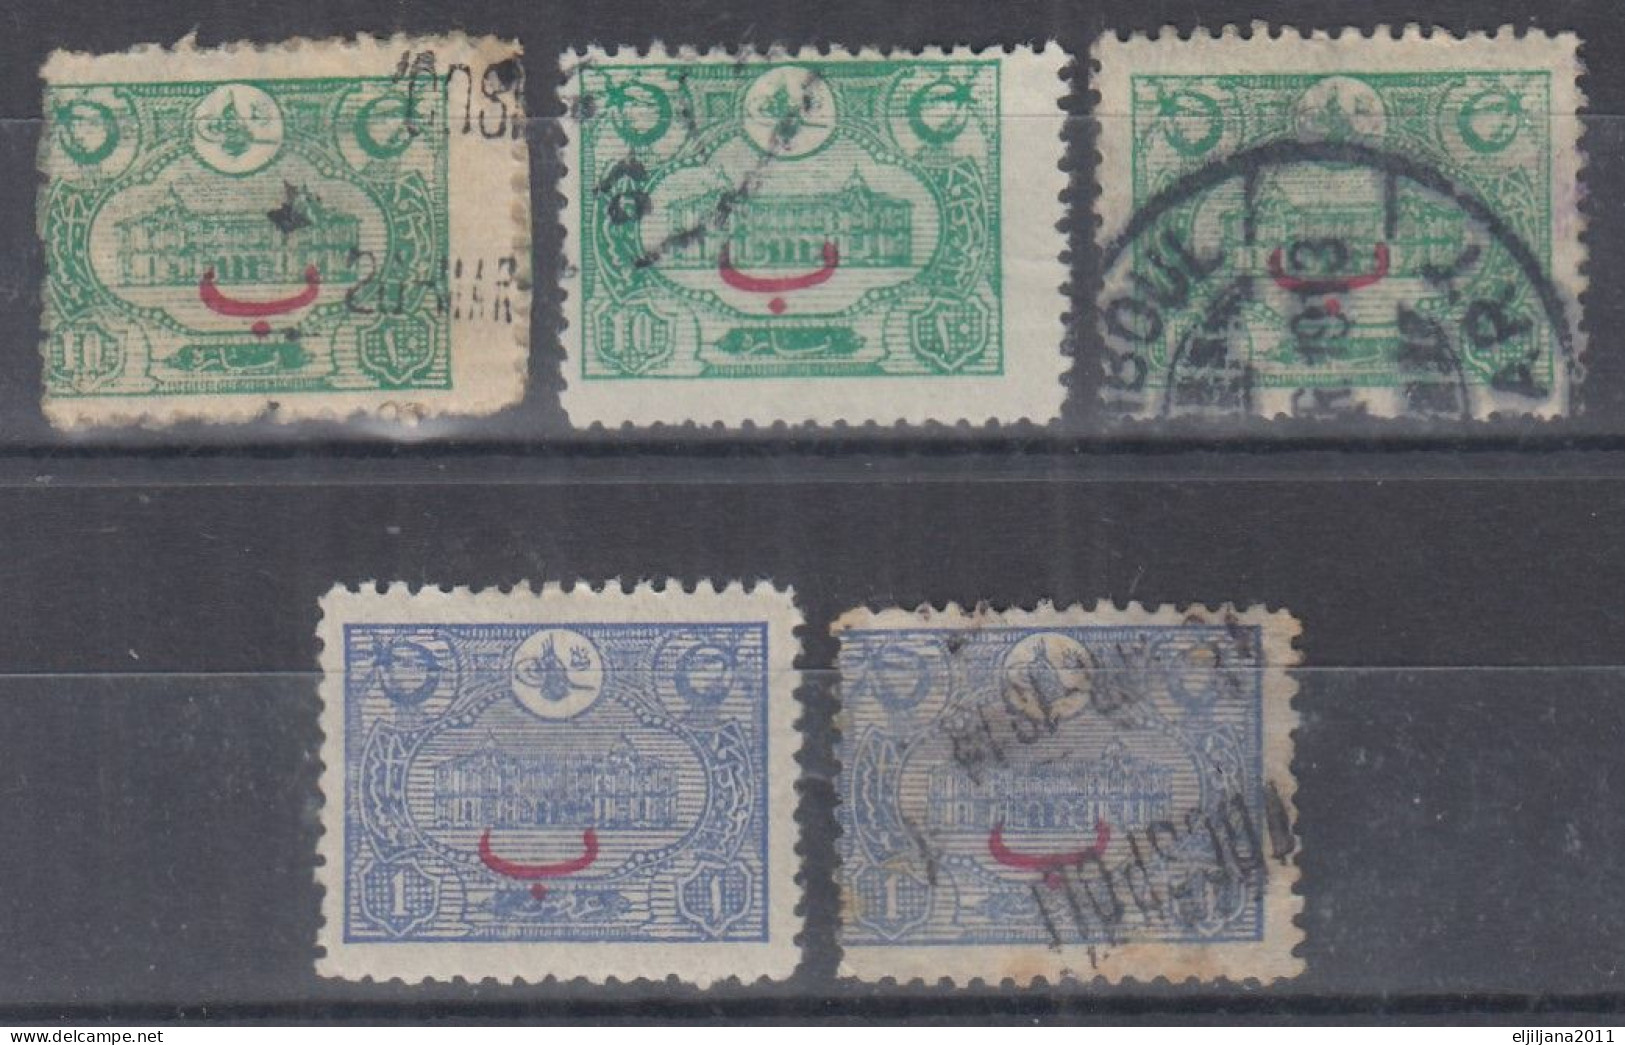 ⁕ Turkey 1913 ⁕ Foreign Post, Overprint / Main Post Office Constantinople Mi. 222 & Mi.224 ⁕ 4v Used 1v MH - Used Stamps